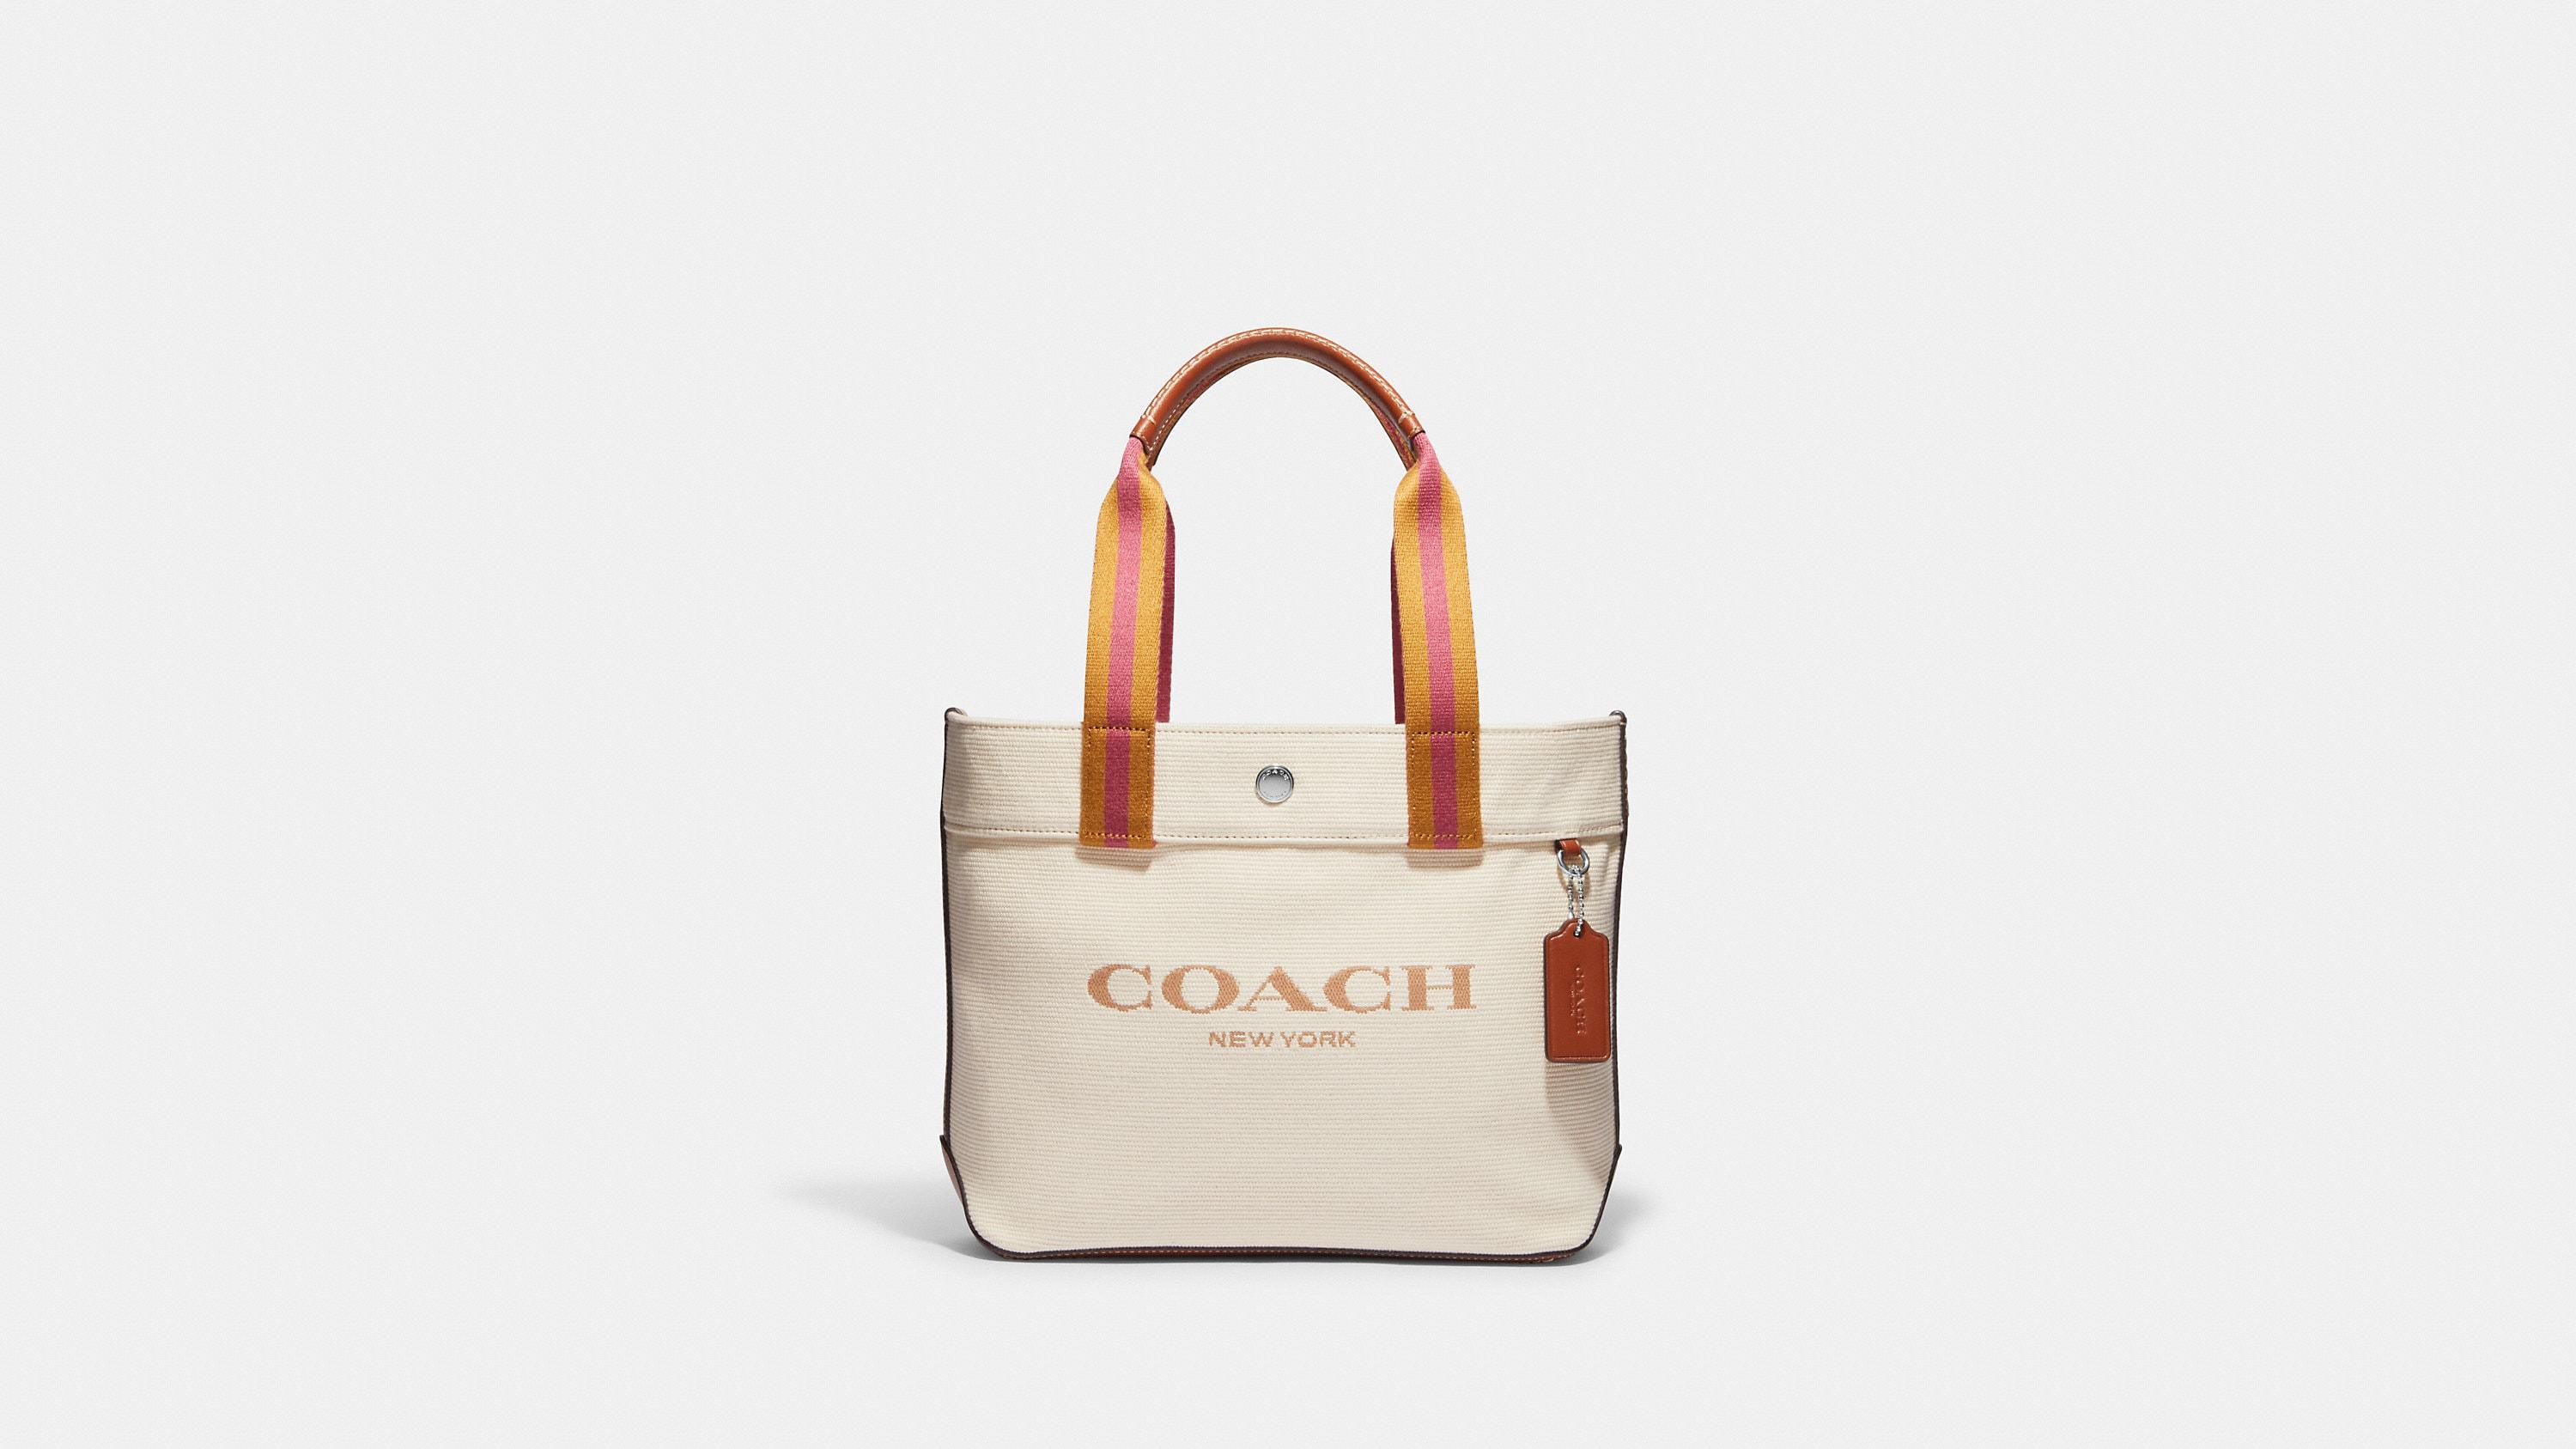 COACH Small Canvas Tote Bag in Black | Lyst UK